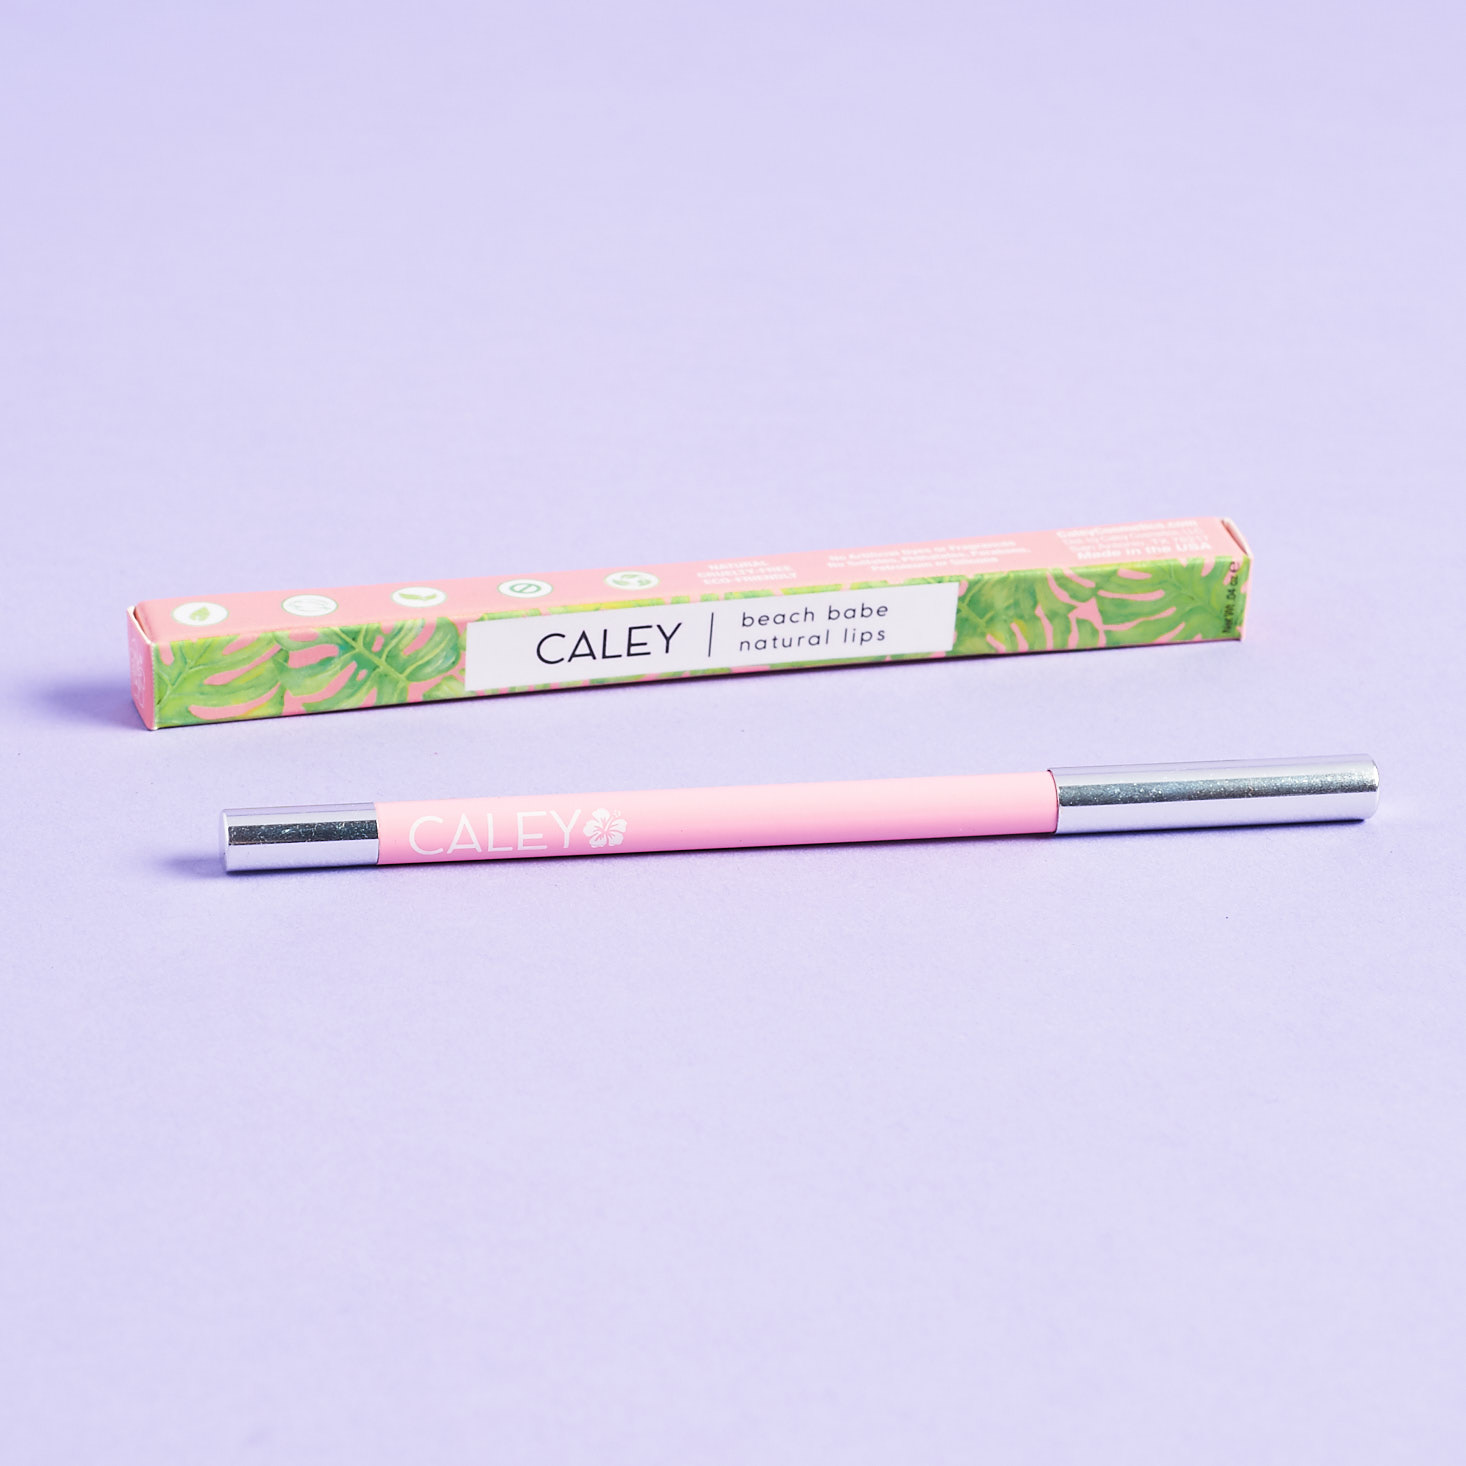 Caley Beach Babe Natural Lip Pencil in Dusty Rose